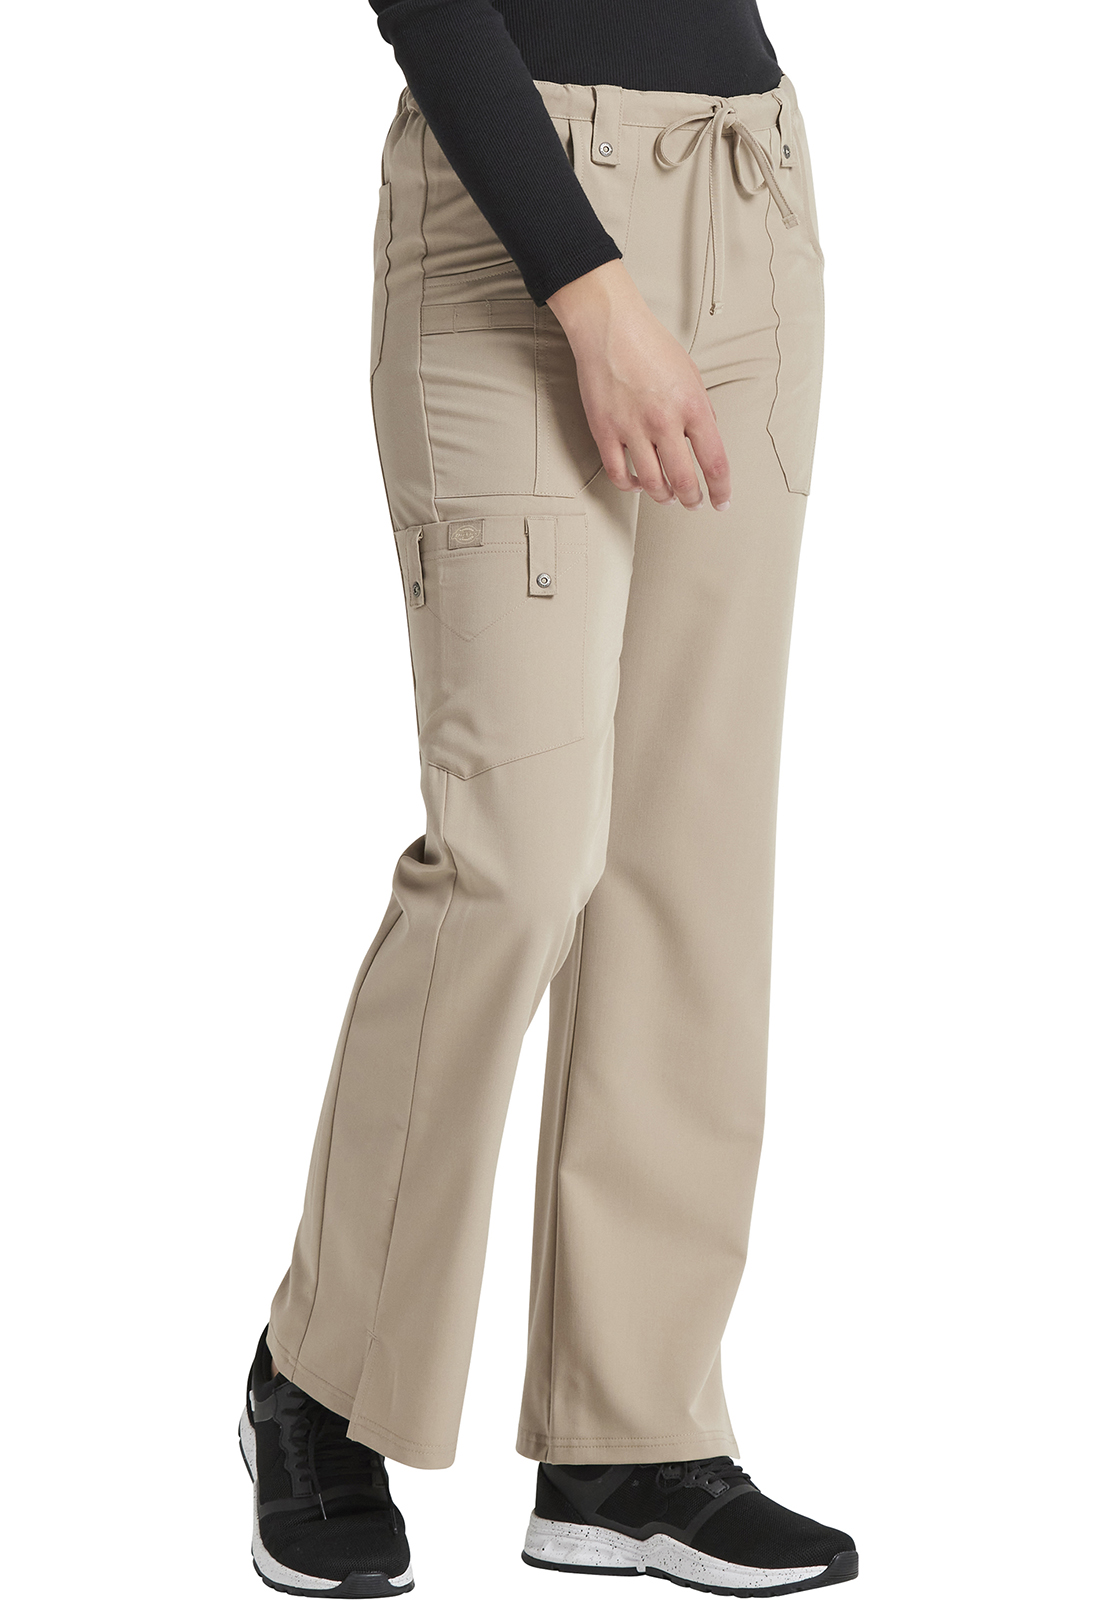 Dickies Women's Navy Xtreme Stretch Mid Rise Drawstring Cargo Pant